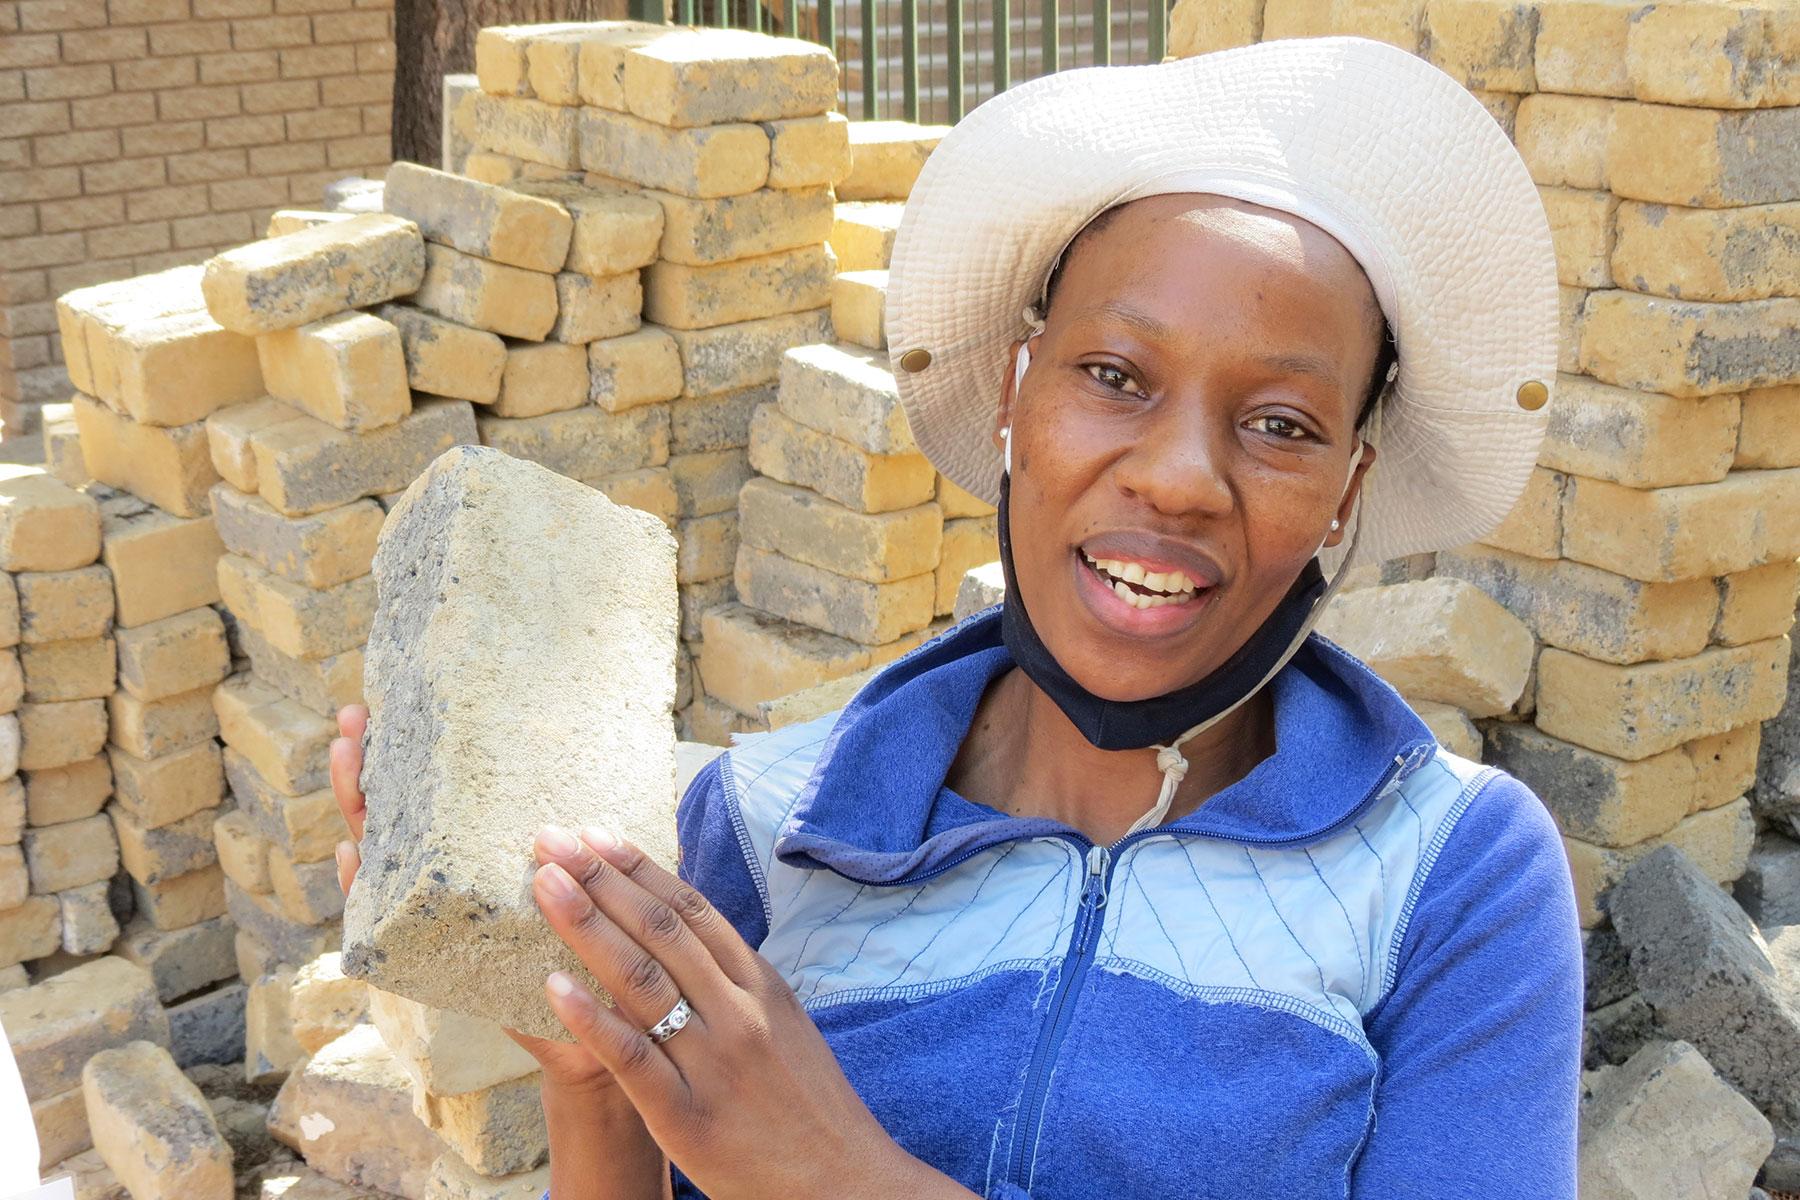 Bricklayer Makhatutu Siimane, showing what she can do with bricks. Photo: Outreach Foundation